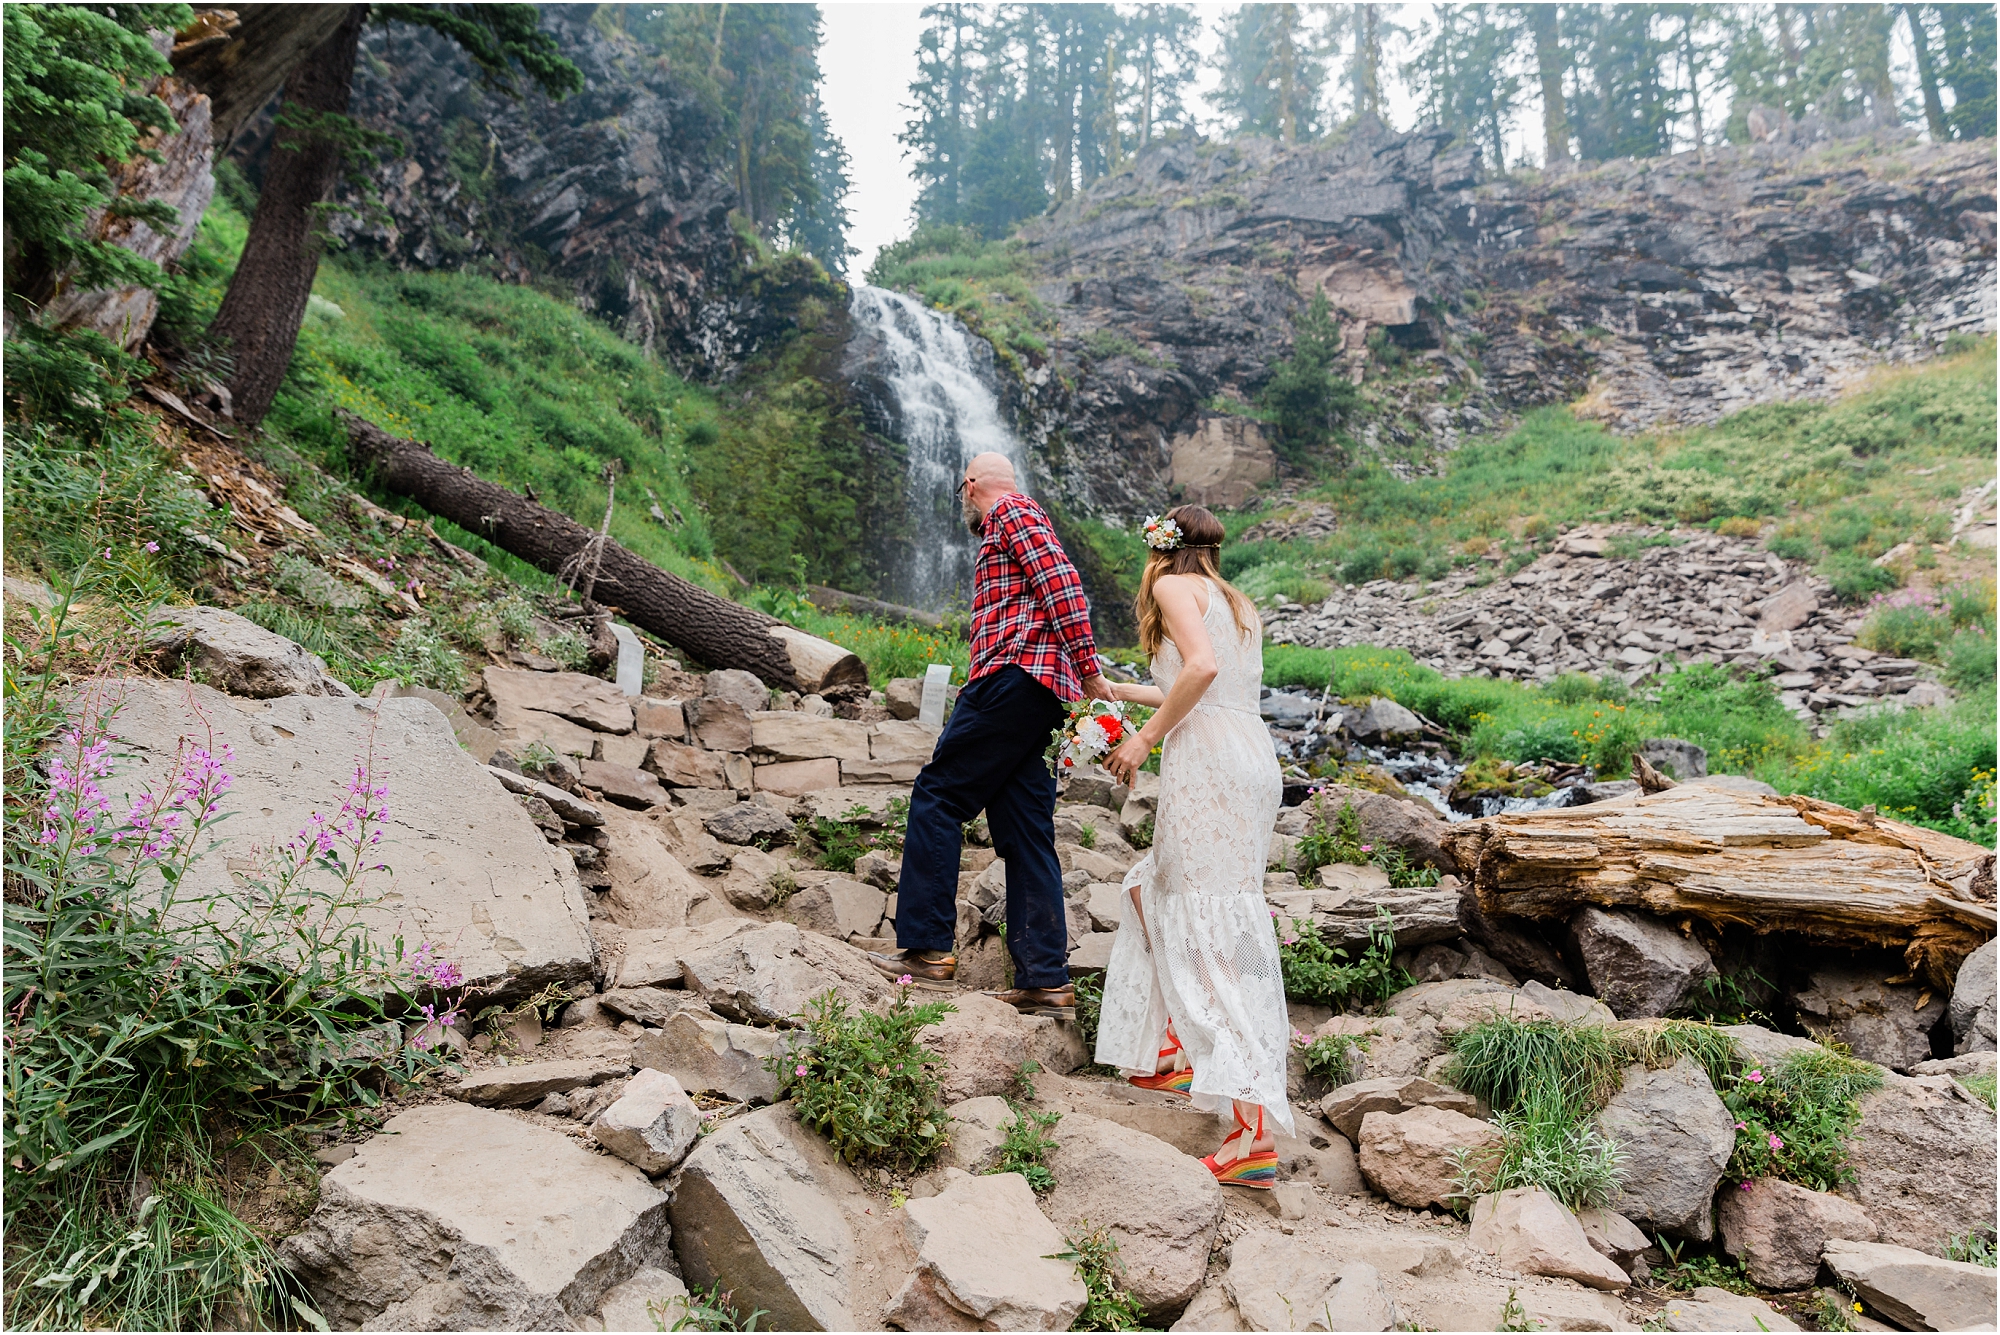 A groom wearing a red plaid shirt, and a bohemian bride with a floral crown and rainbow heels, approaches the ceremony site for their Crater Lake elopement in Oregon. | Erica Swantek Photography